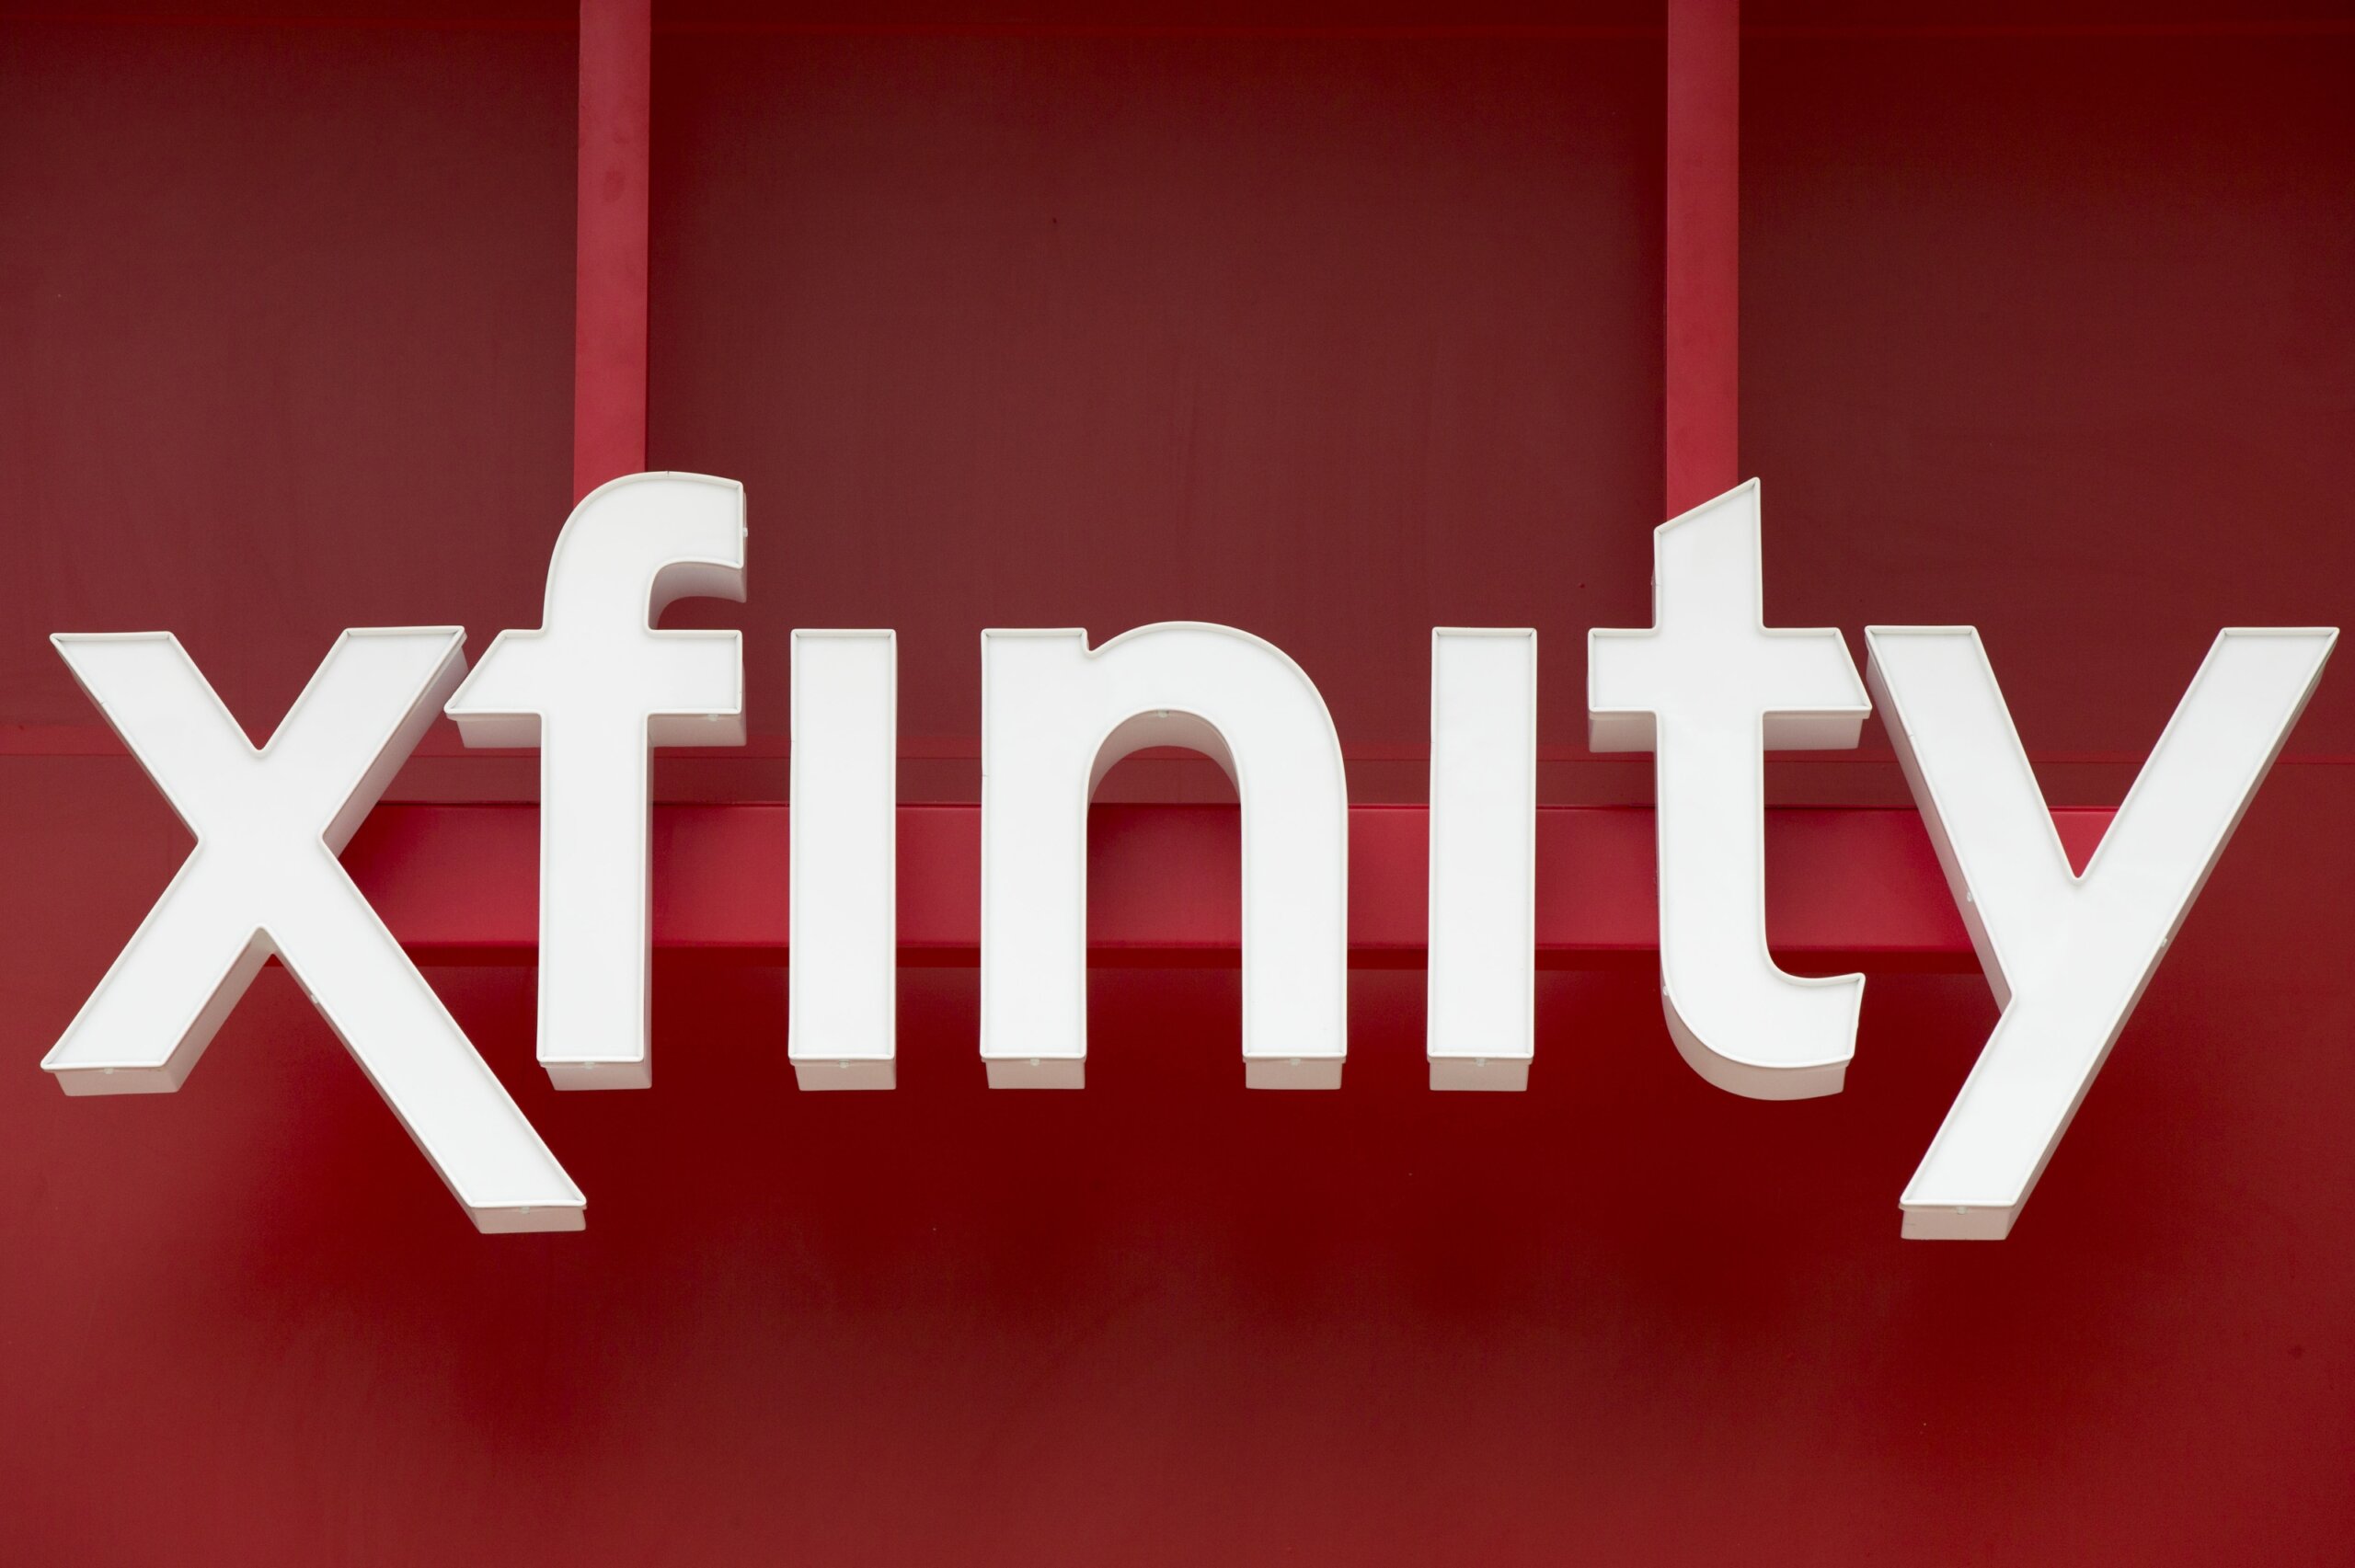 Xfinity notifies its customers of data breach linked to software